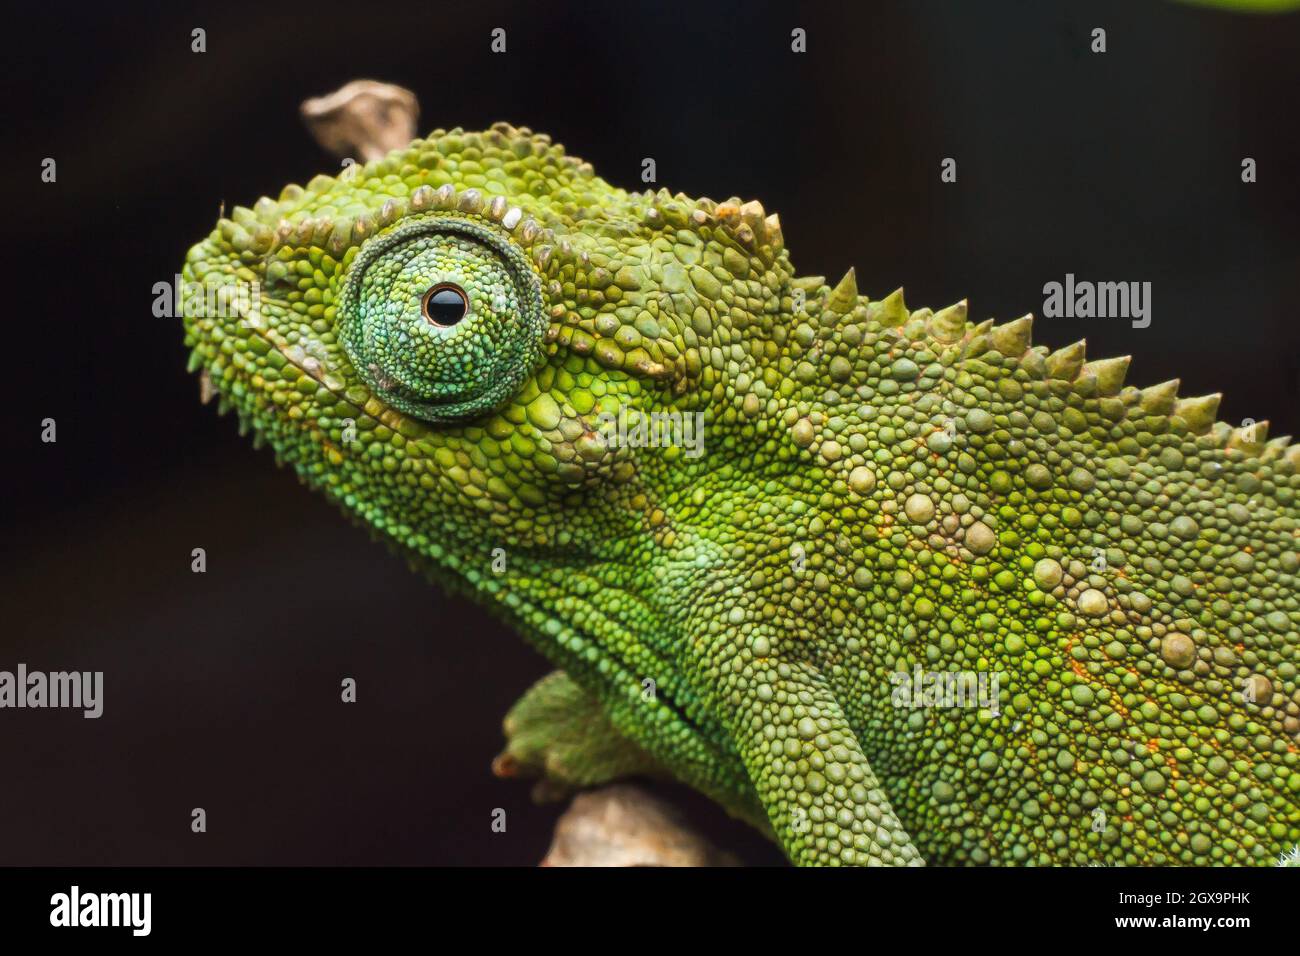 If a chameleon's eyes were covered, would it still be able to